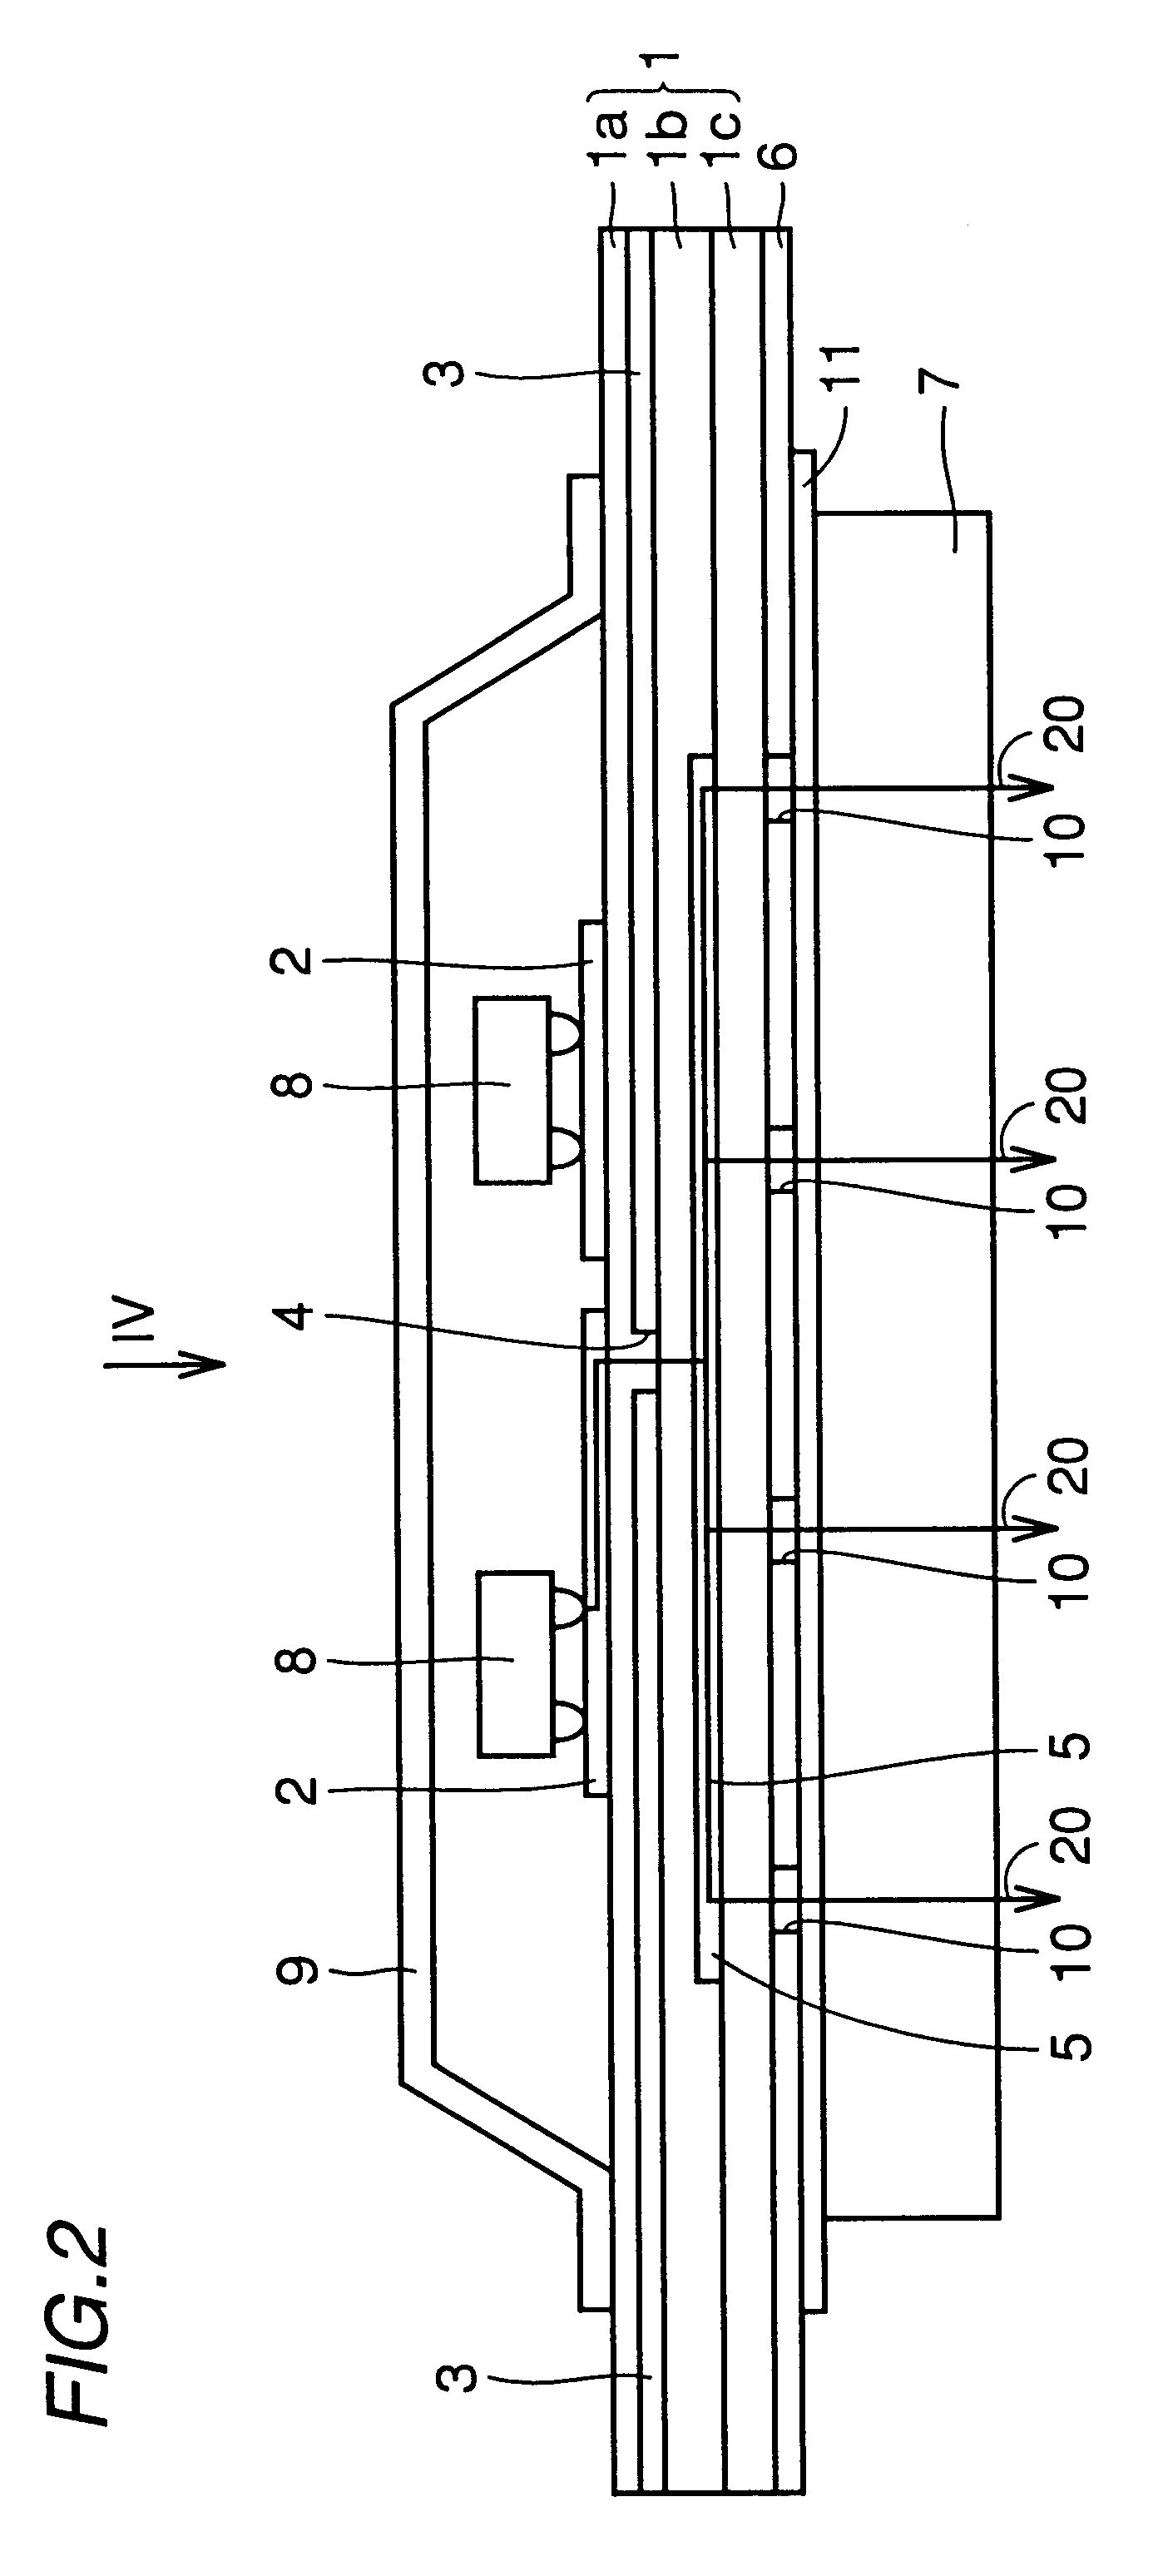 Antenna-integrated microwave-millimeter wave module